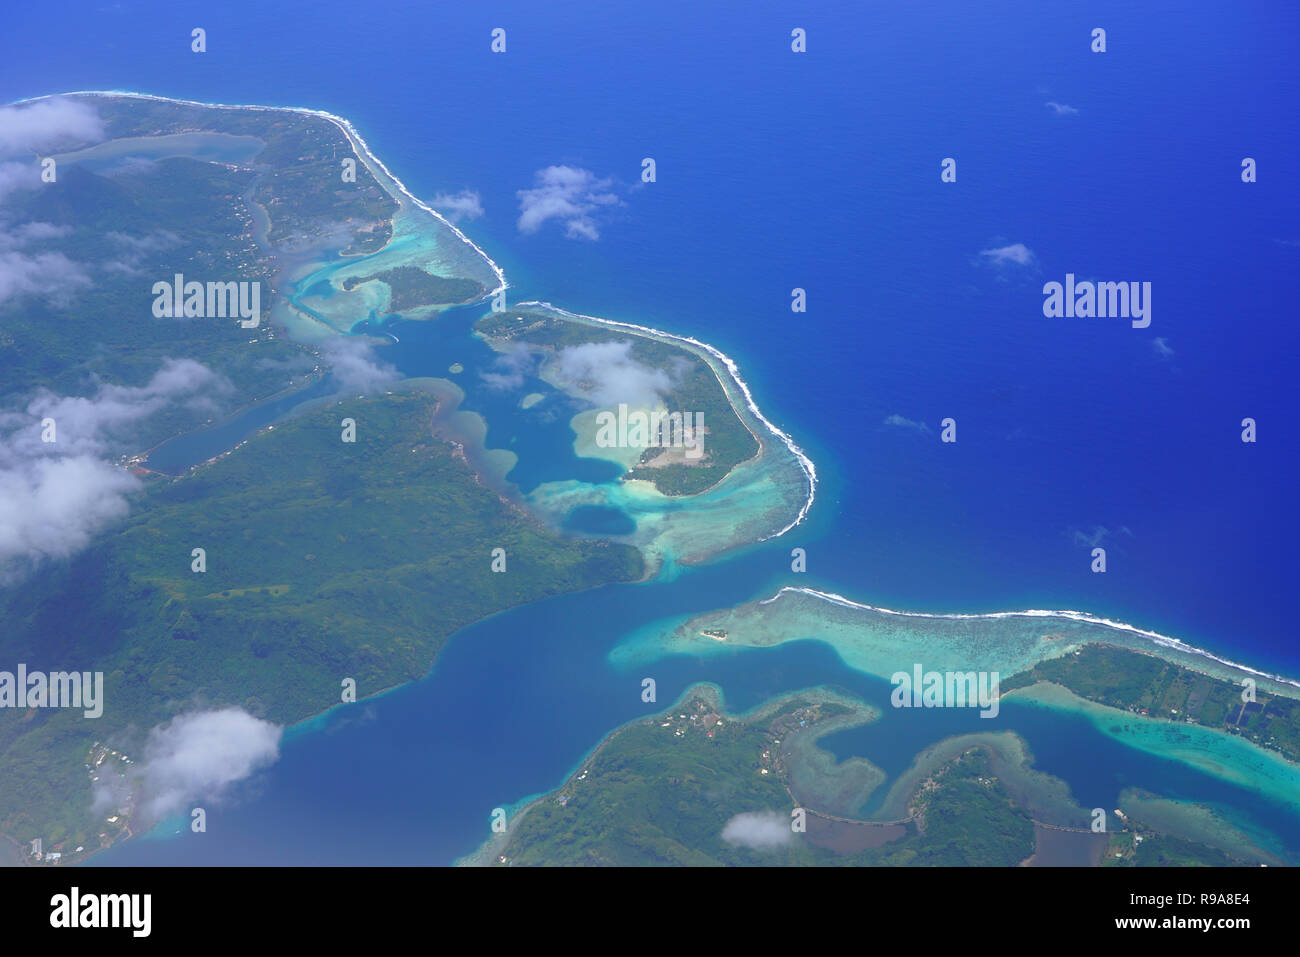 Aerial view of the island and lagoon of Huahine near Tahiti in French Polynesia, South Pacific Stock Photo